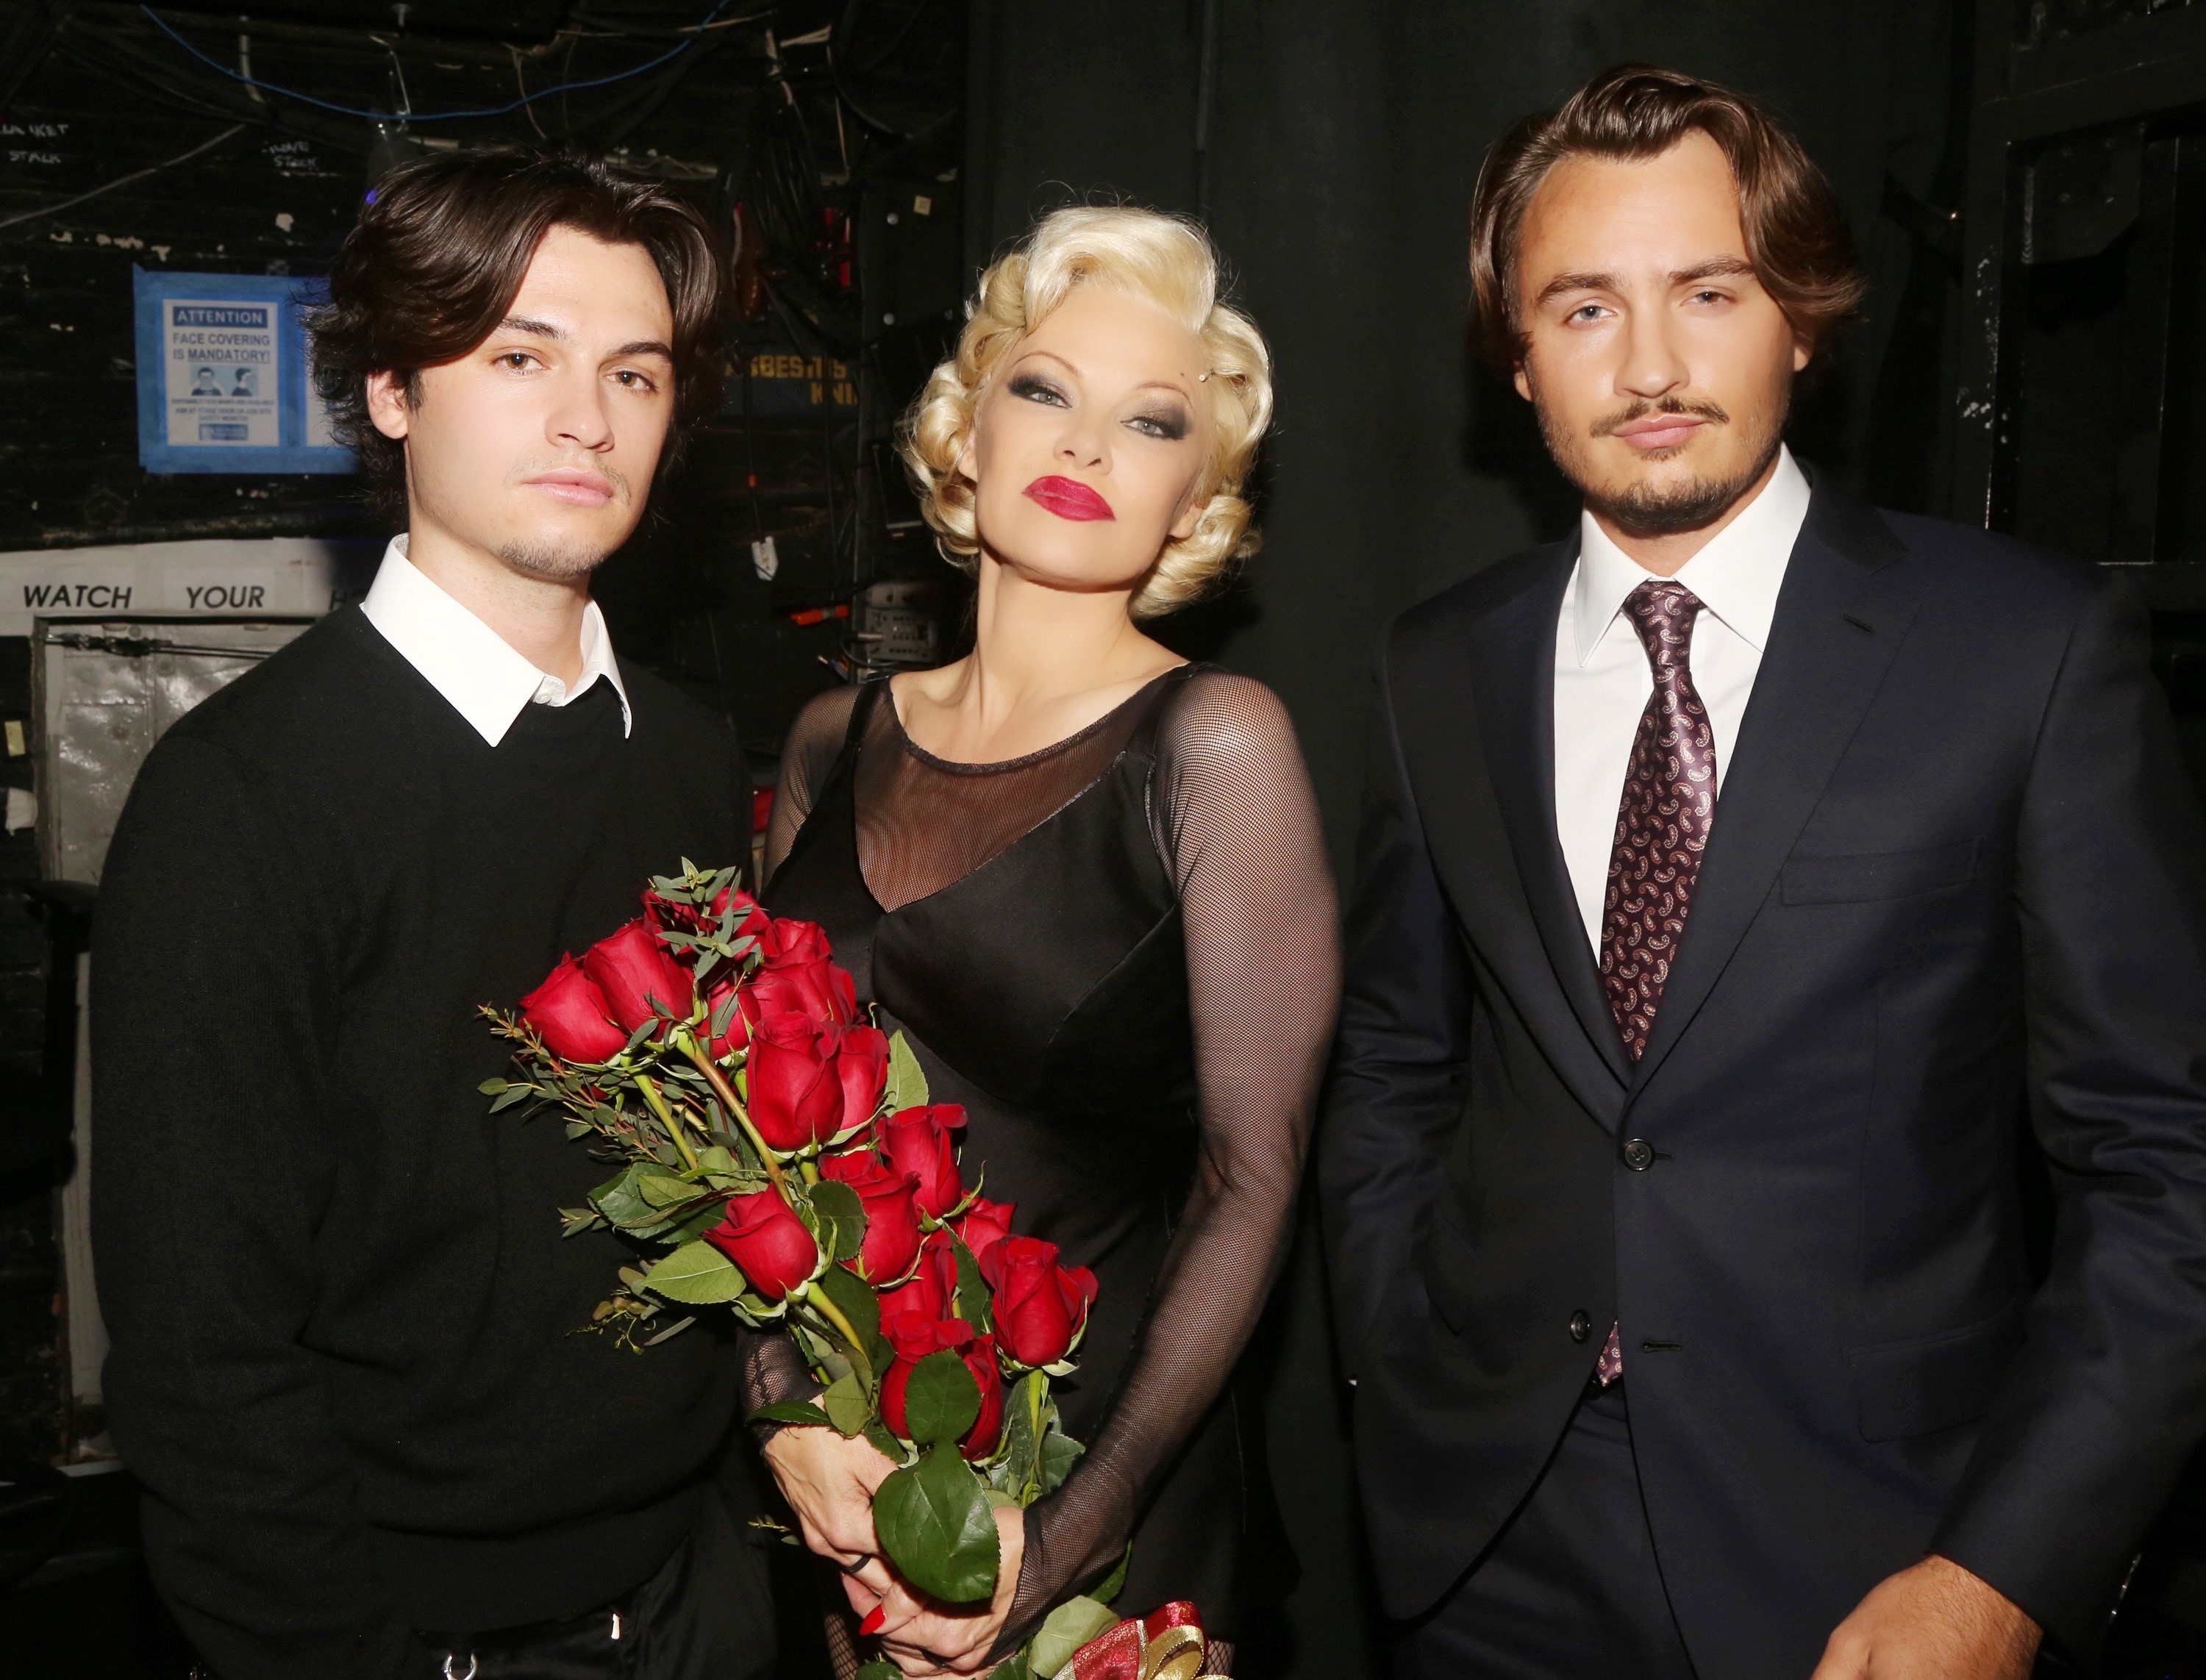 Dylan Lee, Pamela Anderson and Brandon Lee during the opening night of her Broadway debut as Roxie Hart in the musical "Chicago" on Broadway at the Ambassador Theatre in New York City on April 12, 2022. | Source: Getty Images